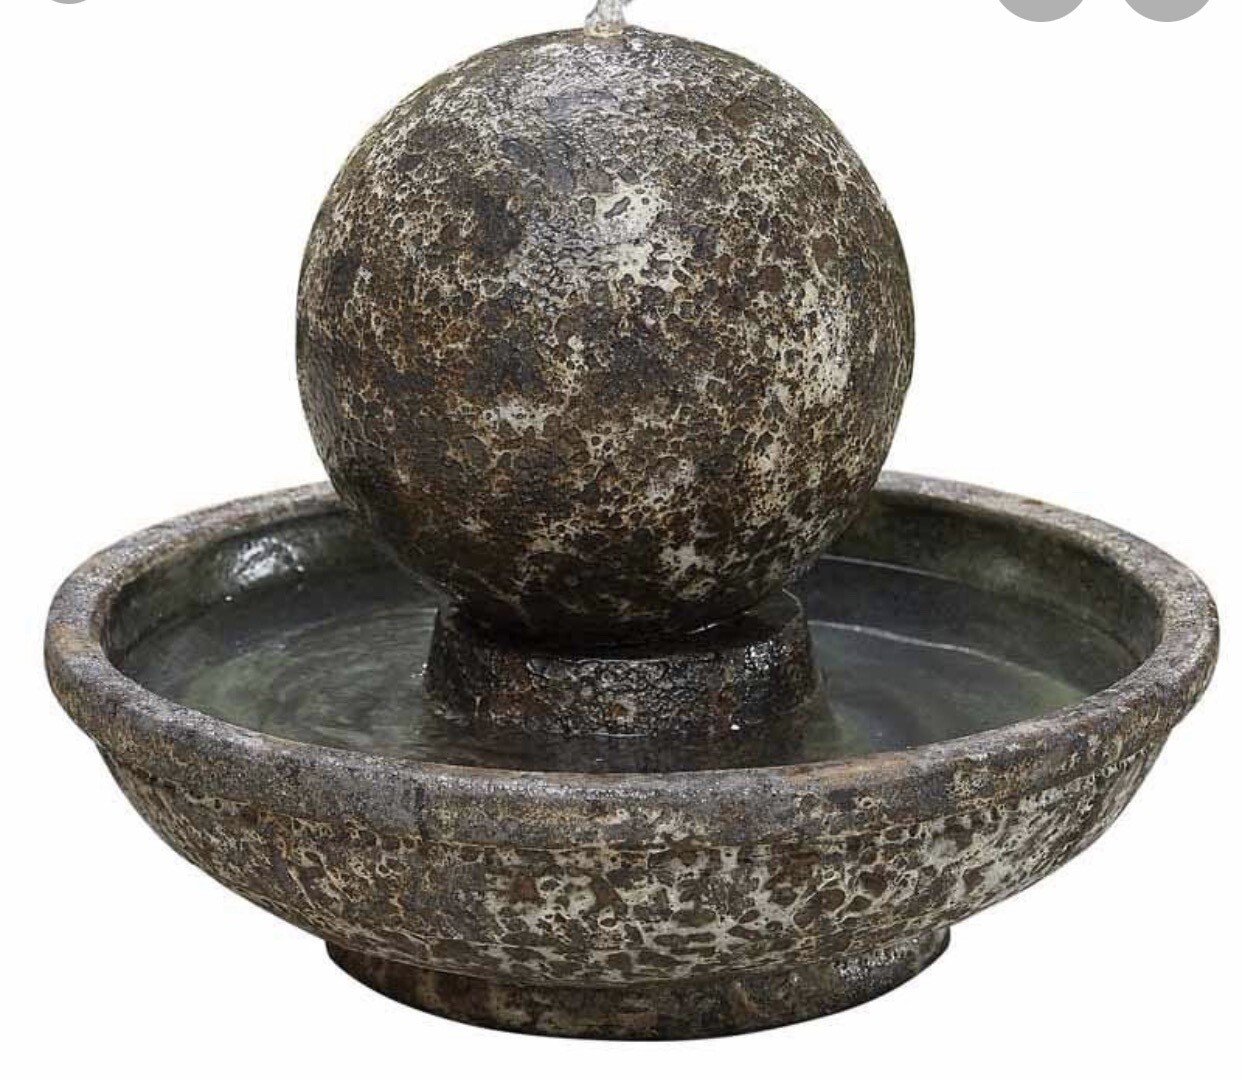 Special Offer - Relic Eclipse Water Feature